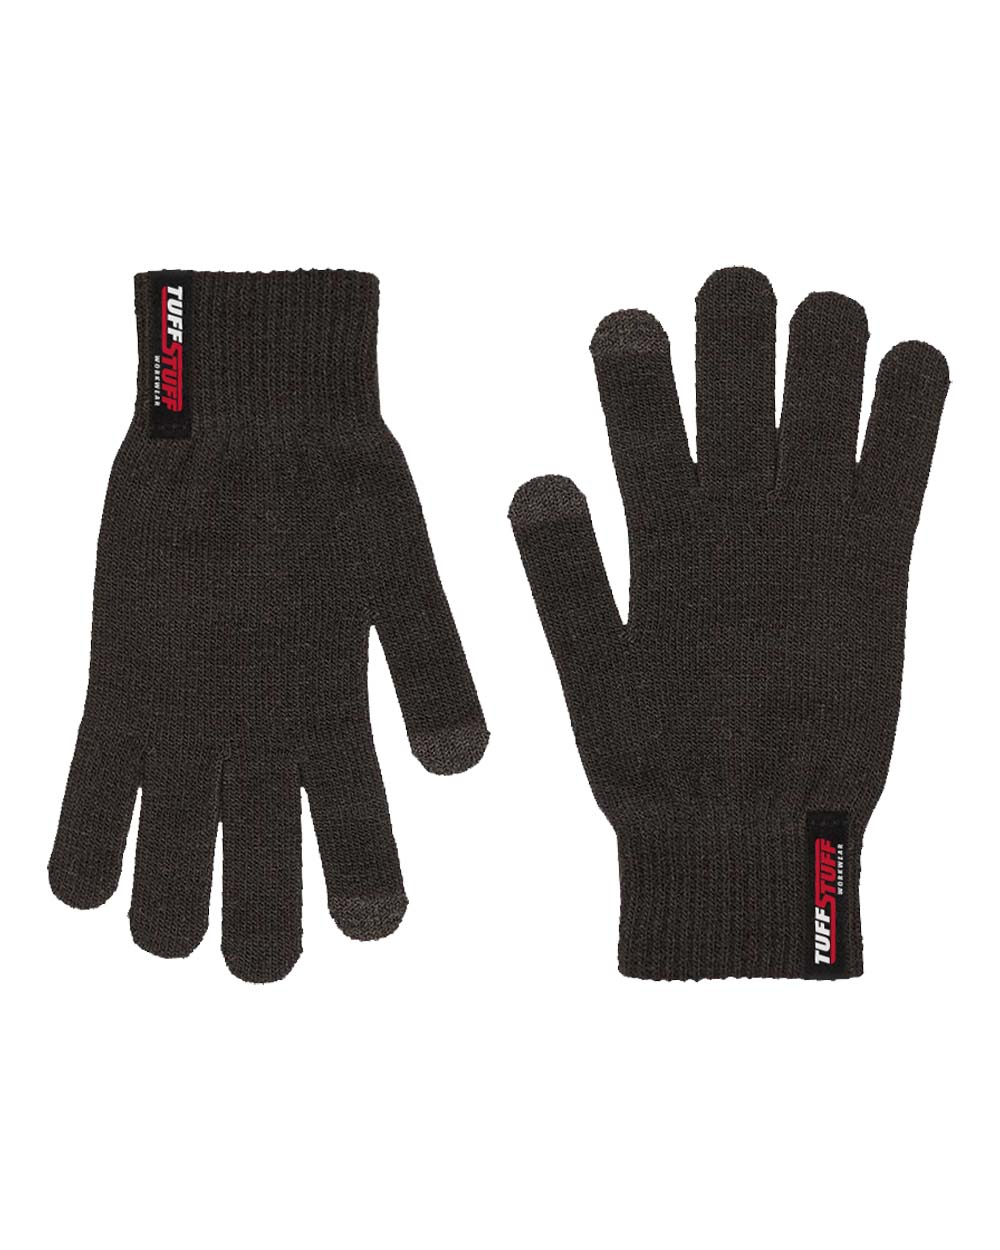 Black coloured TuffStuff Touch Screen Glove on White Background